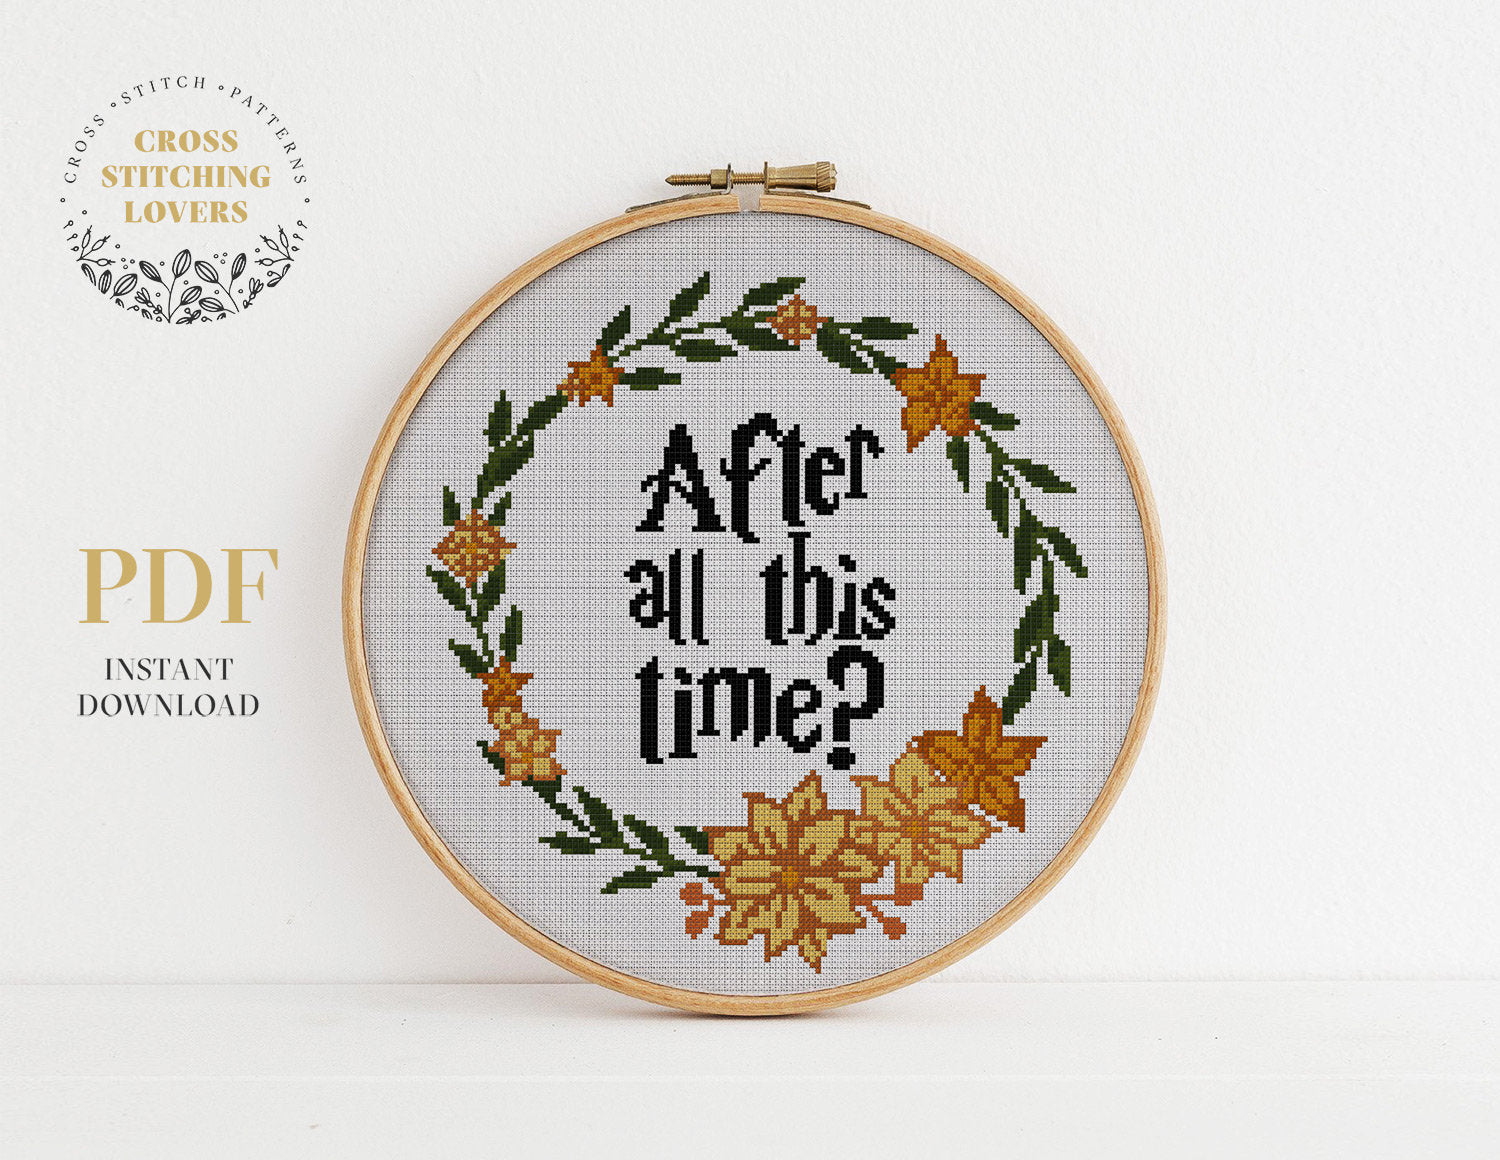 Harry potter, After all this time - Cross stitch pattern – Cross Stitching  Lovers